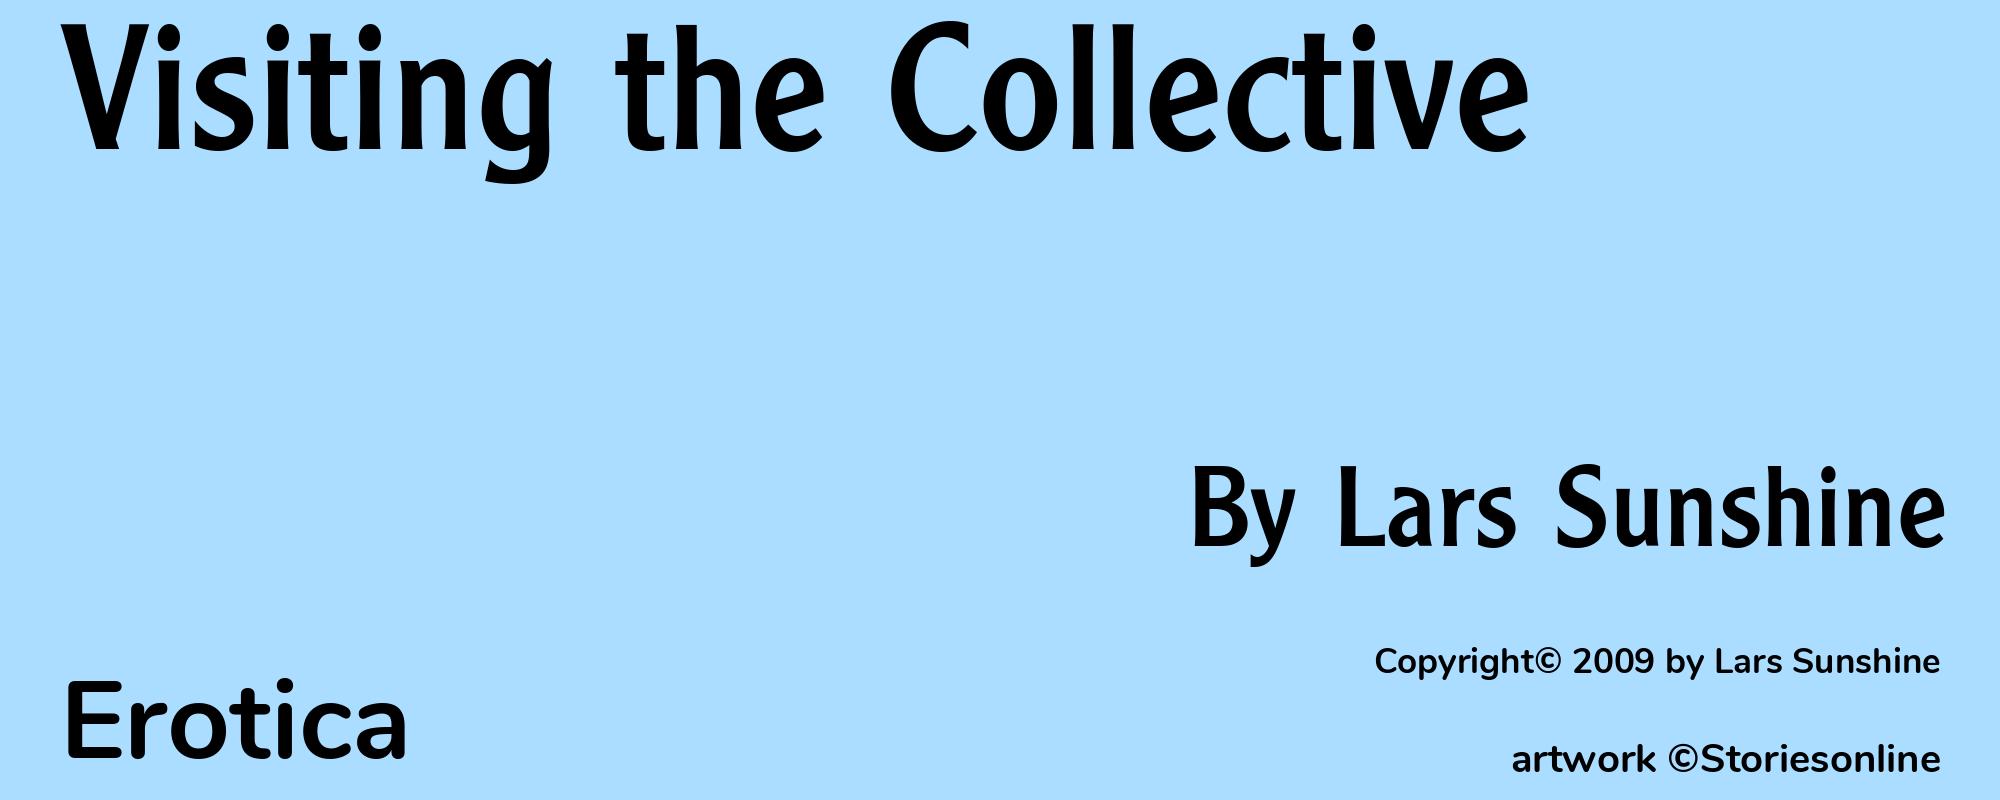 Visiting the Collective - Cover